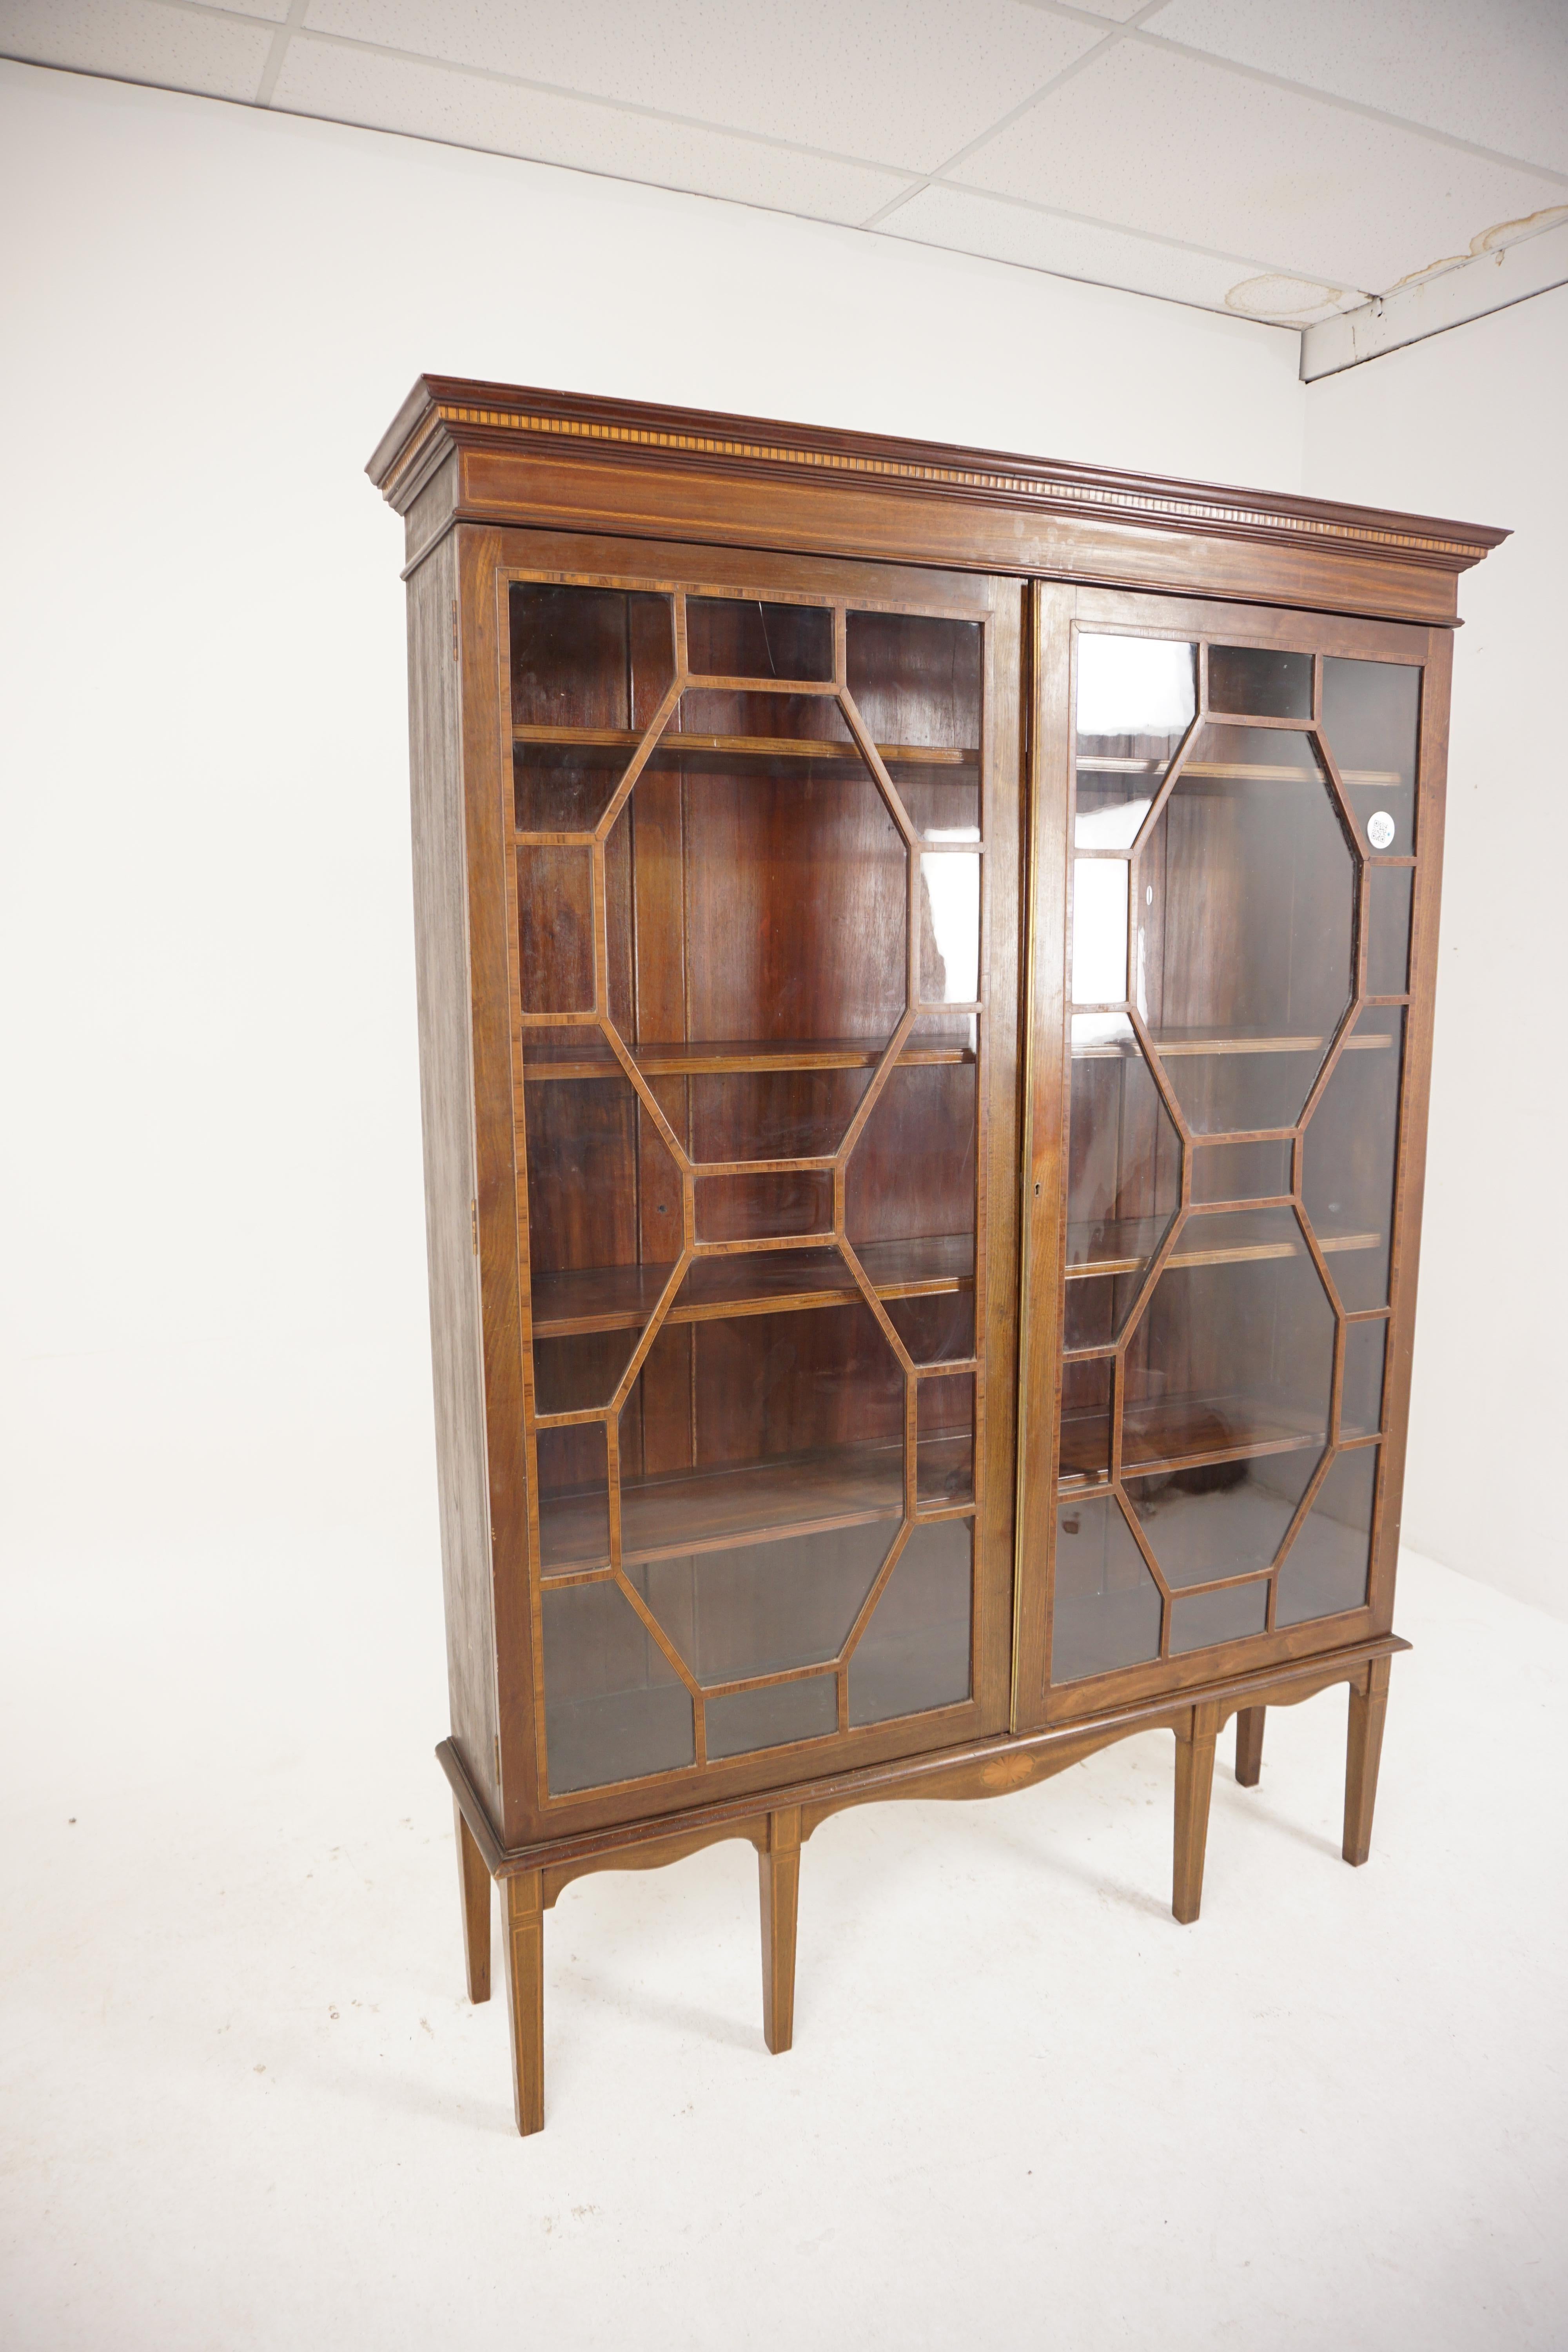 Ant. Victorian Inlaid walnut 2 door display cabinet bookcase, Scotland 1900, H157

Scotland 1900
Solid Walnut + Satinwood Veneer
Original Finish
An inlaid flared cornice above a pair of large original inlaid glass doors
Inlaid moulding on the front